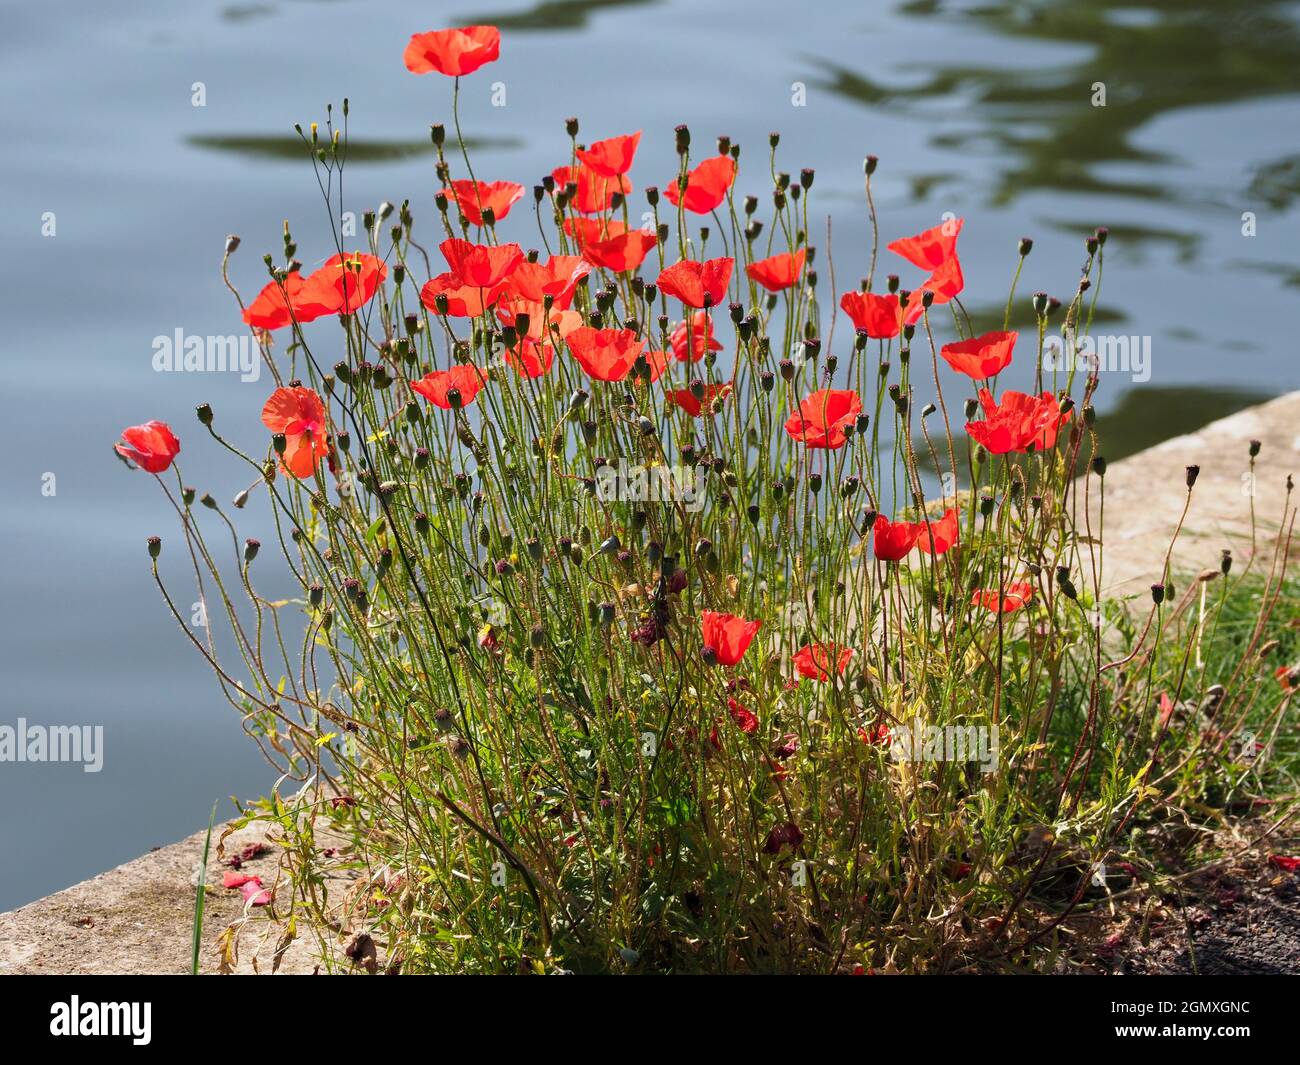 River Thames, Oxfordshire, England - 13 July 2019     Poppies are flowering plant in the subfamily Papaveroideae of the family Papaveraceae. They are Stock Photo